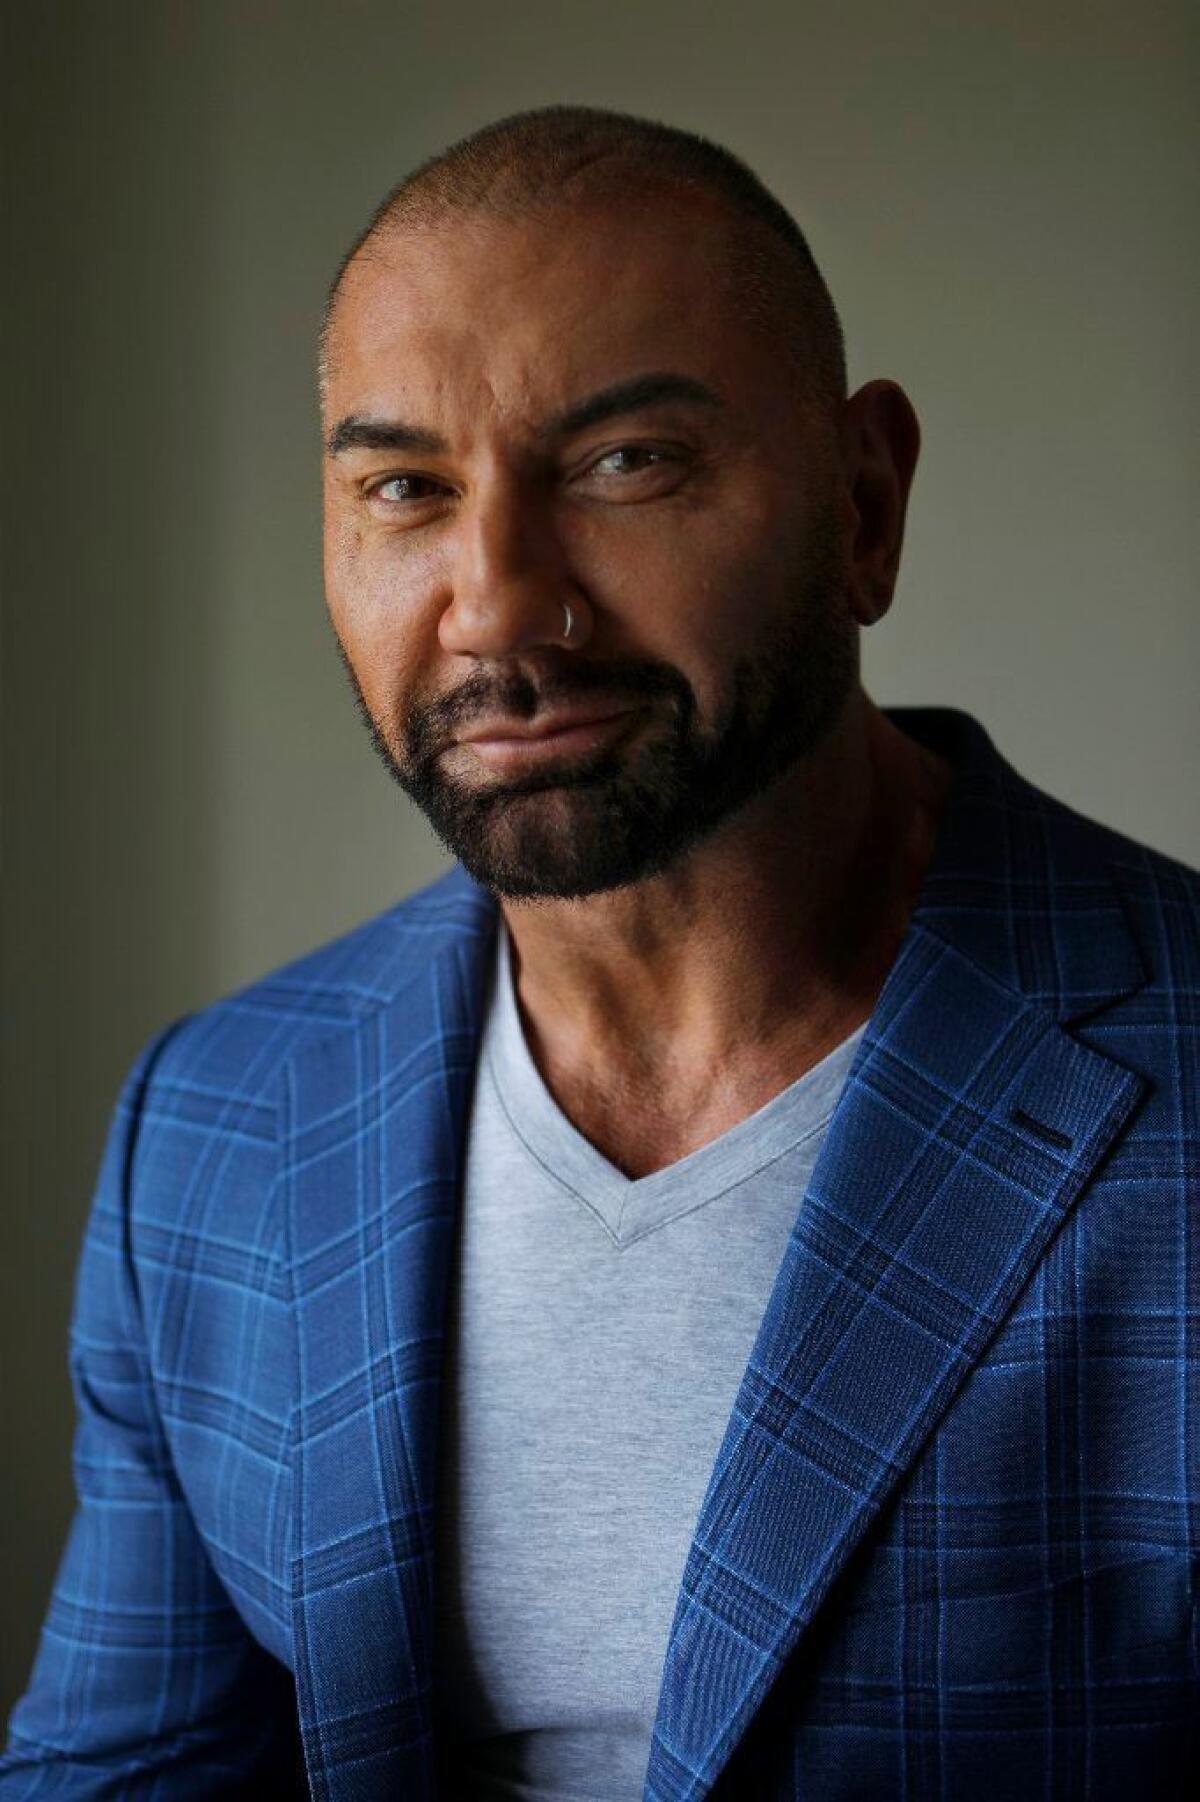 Dave Bautista on his Hollywood dream: "I really set out to be an actor."